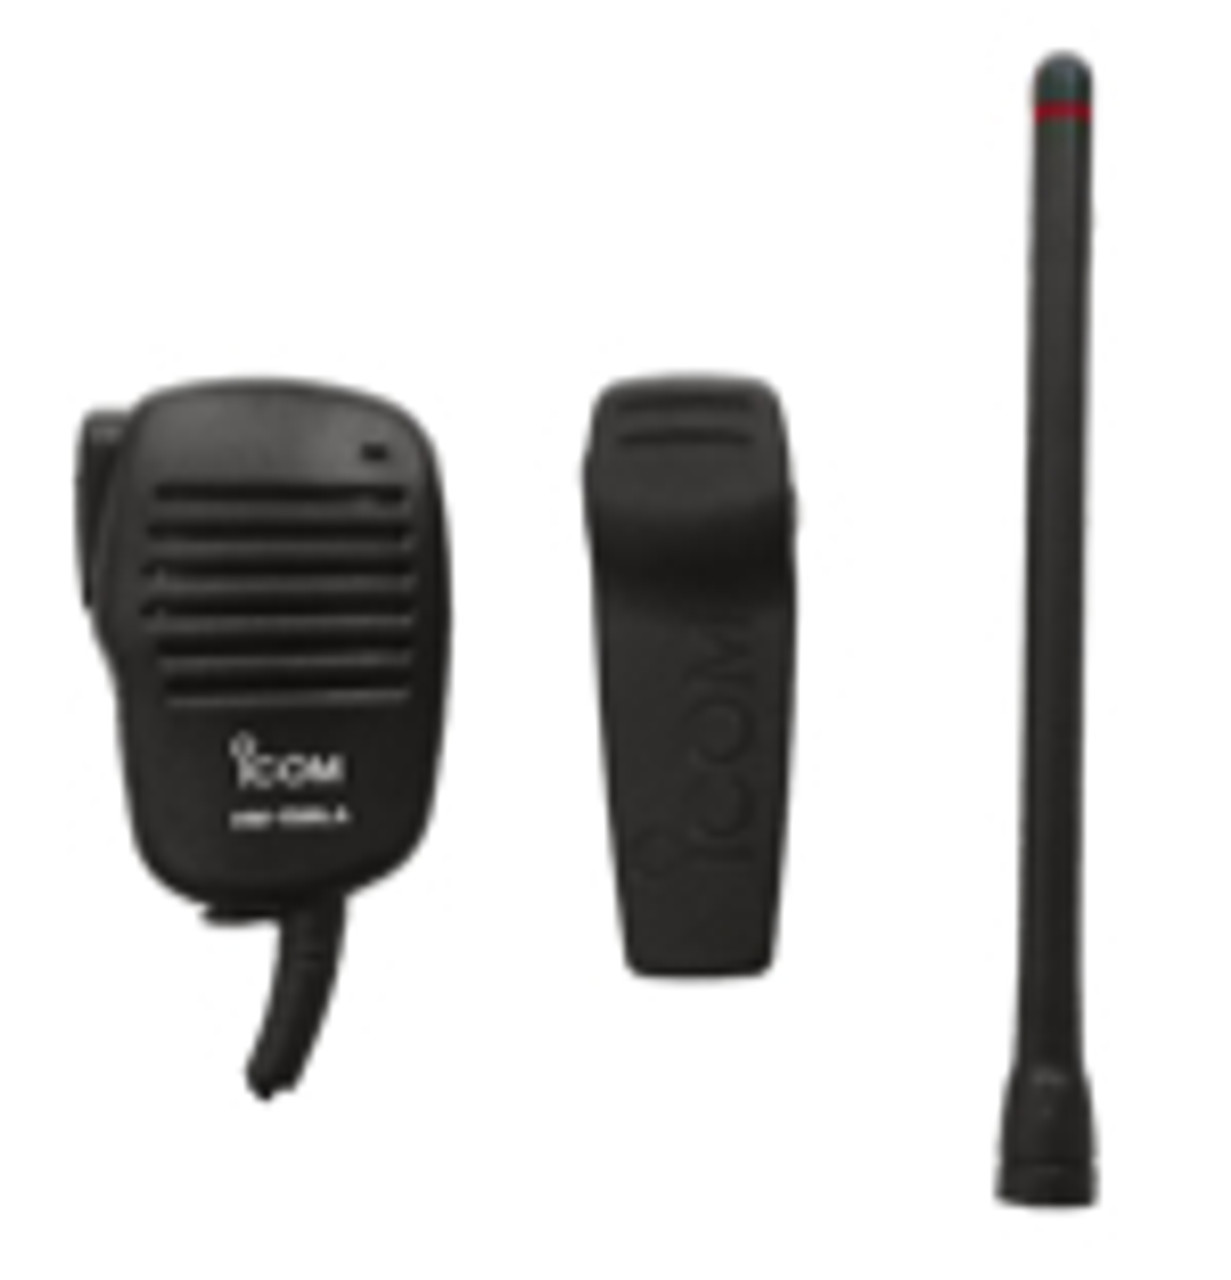 Icom OPC-2338 Programming Cable for Two Way Radios - 14-pin